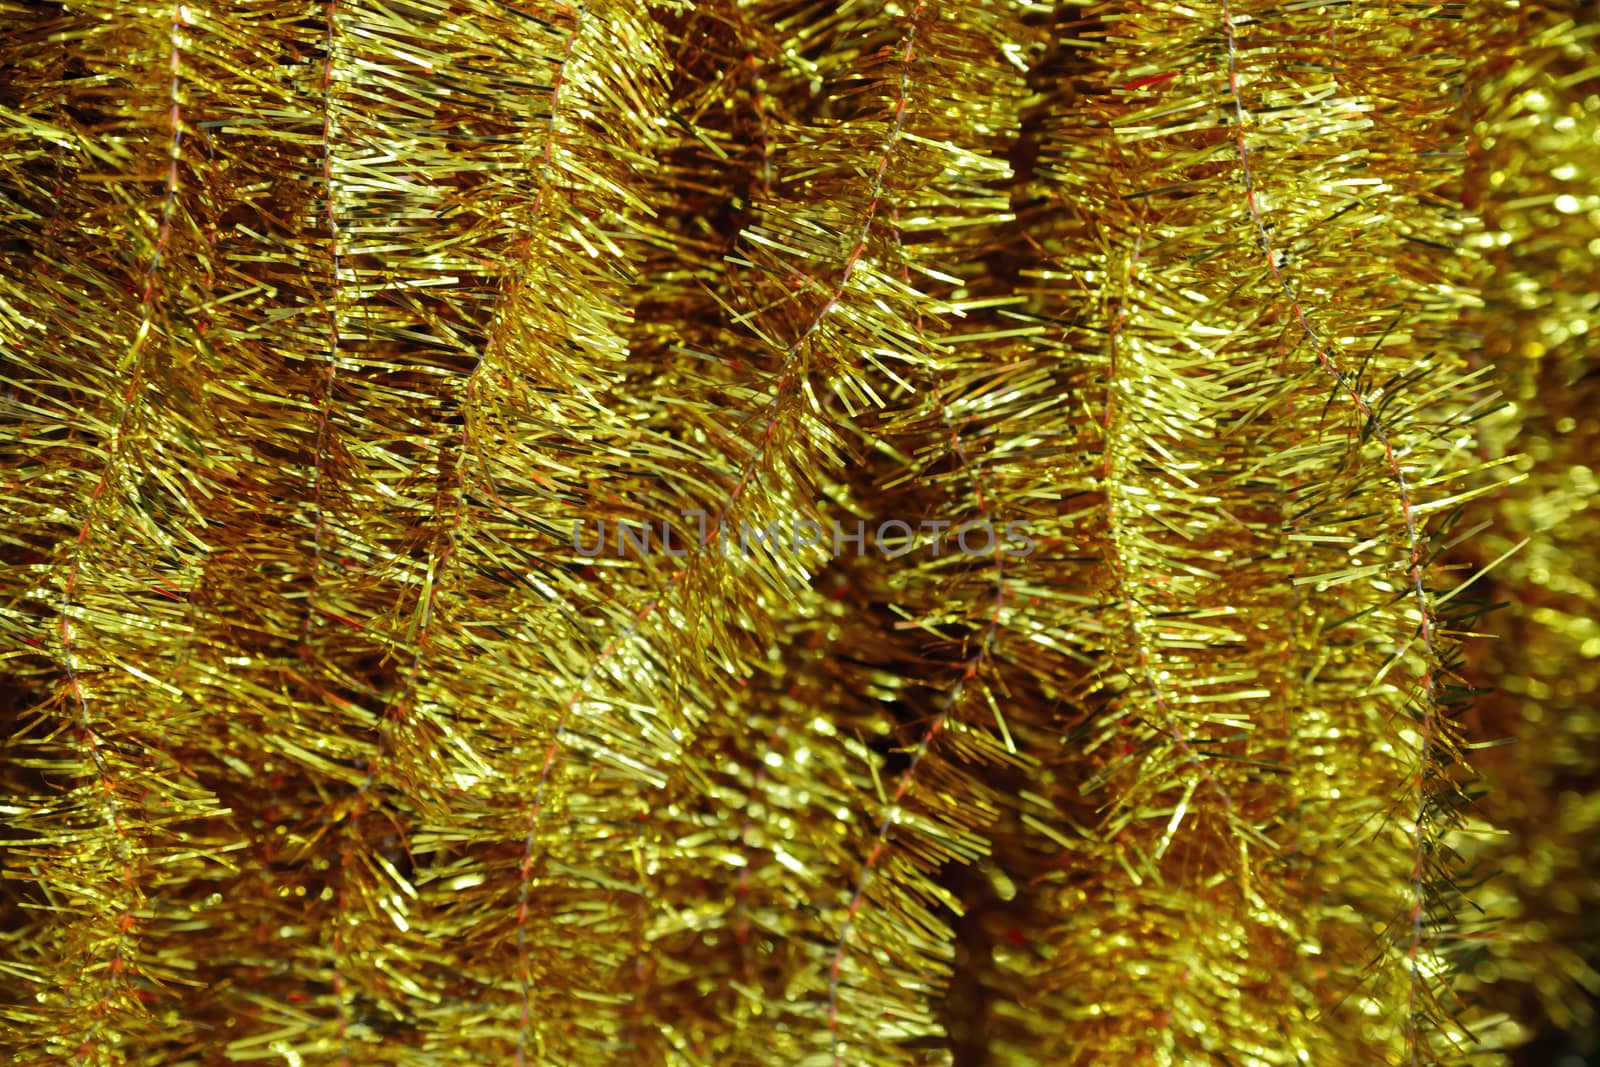 Christmas decoration on abstract background by bonilook